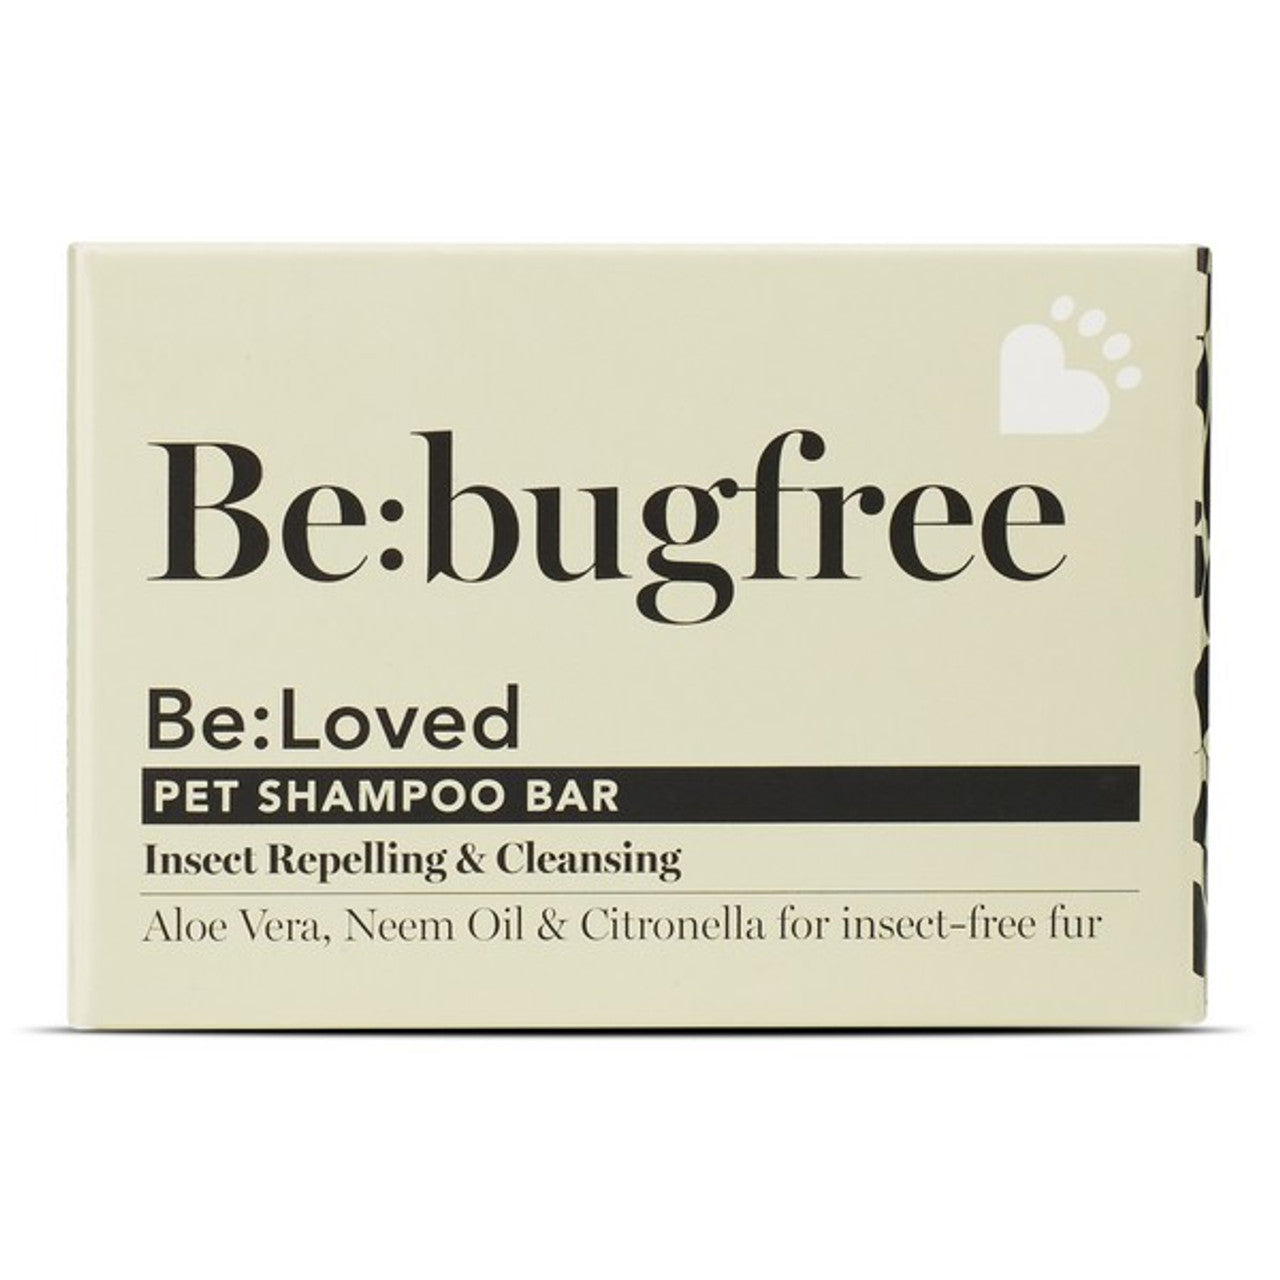 Be:Bug Free Insect repelling Pet Shampoo Bar 110g